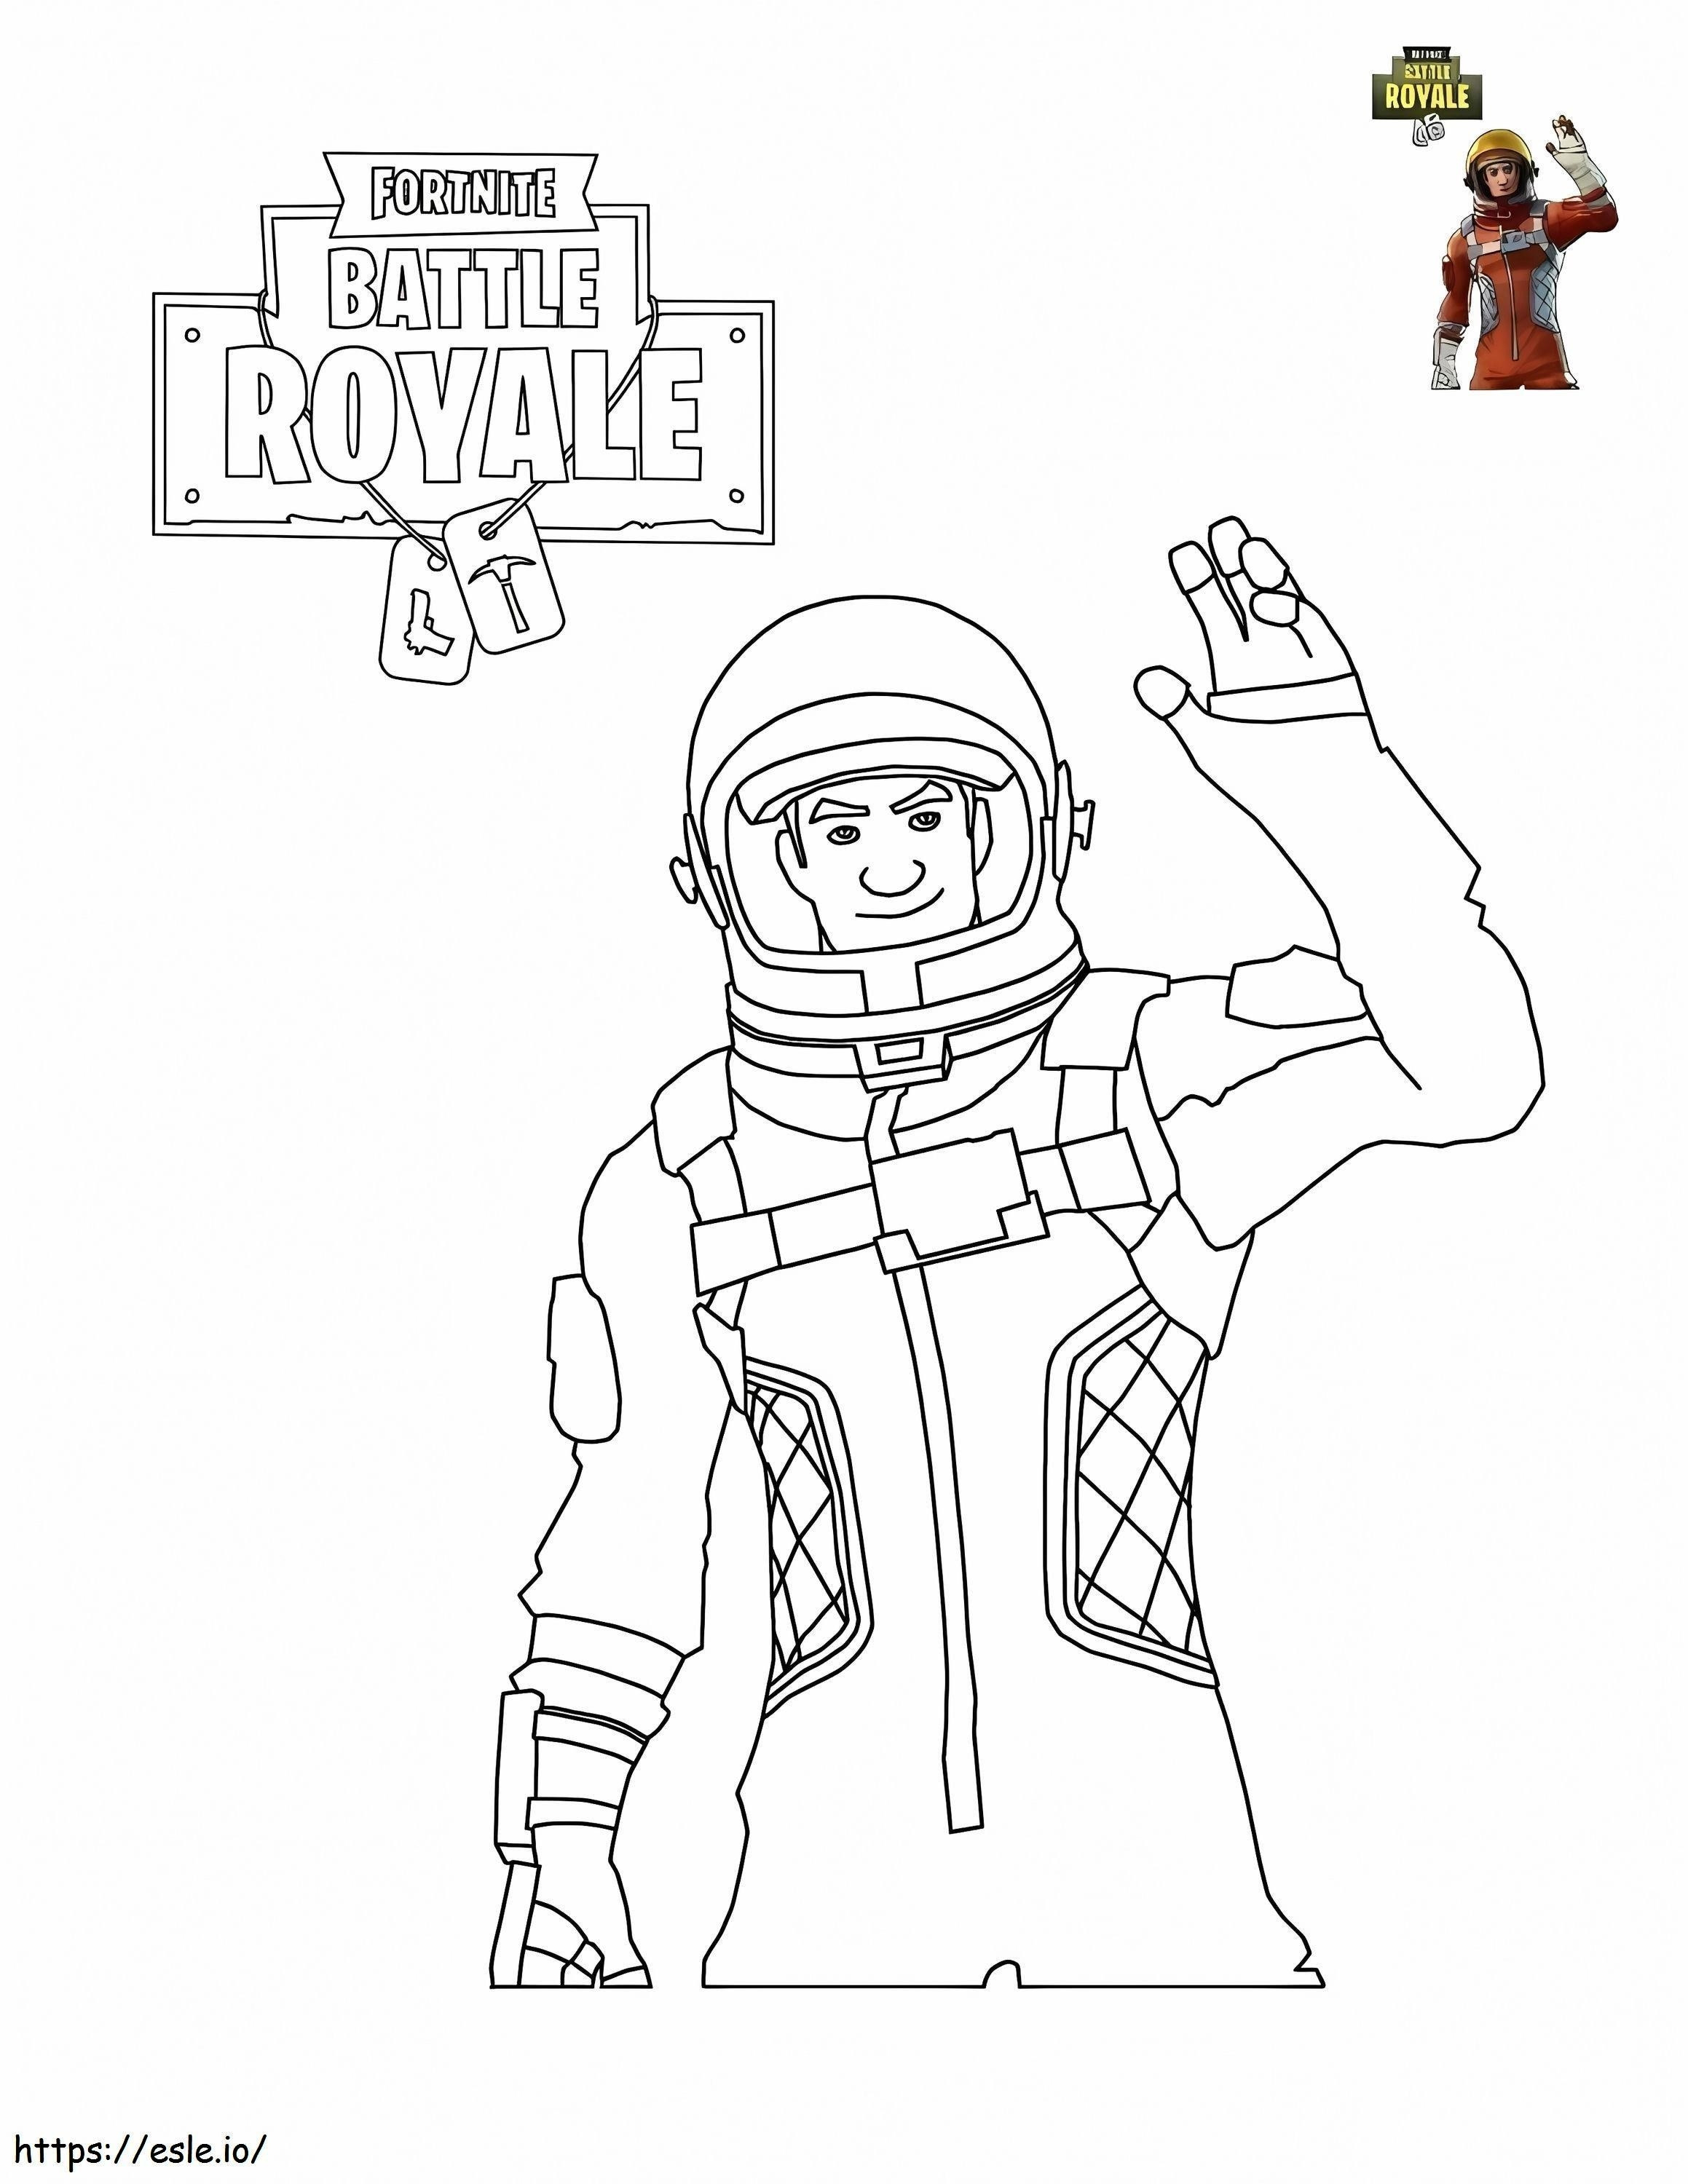 1532742793 Man In Fortnite Battle Royale A4 coloring page